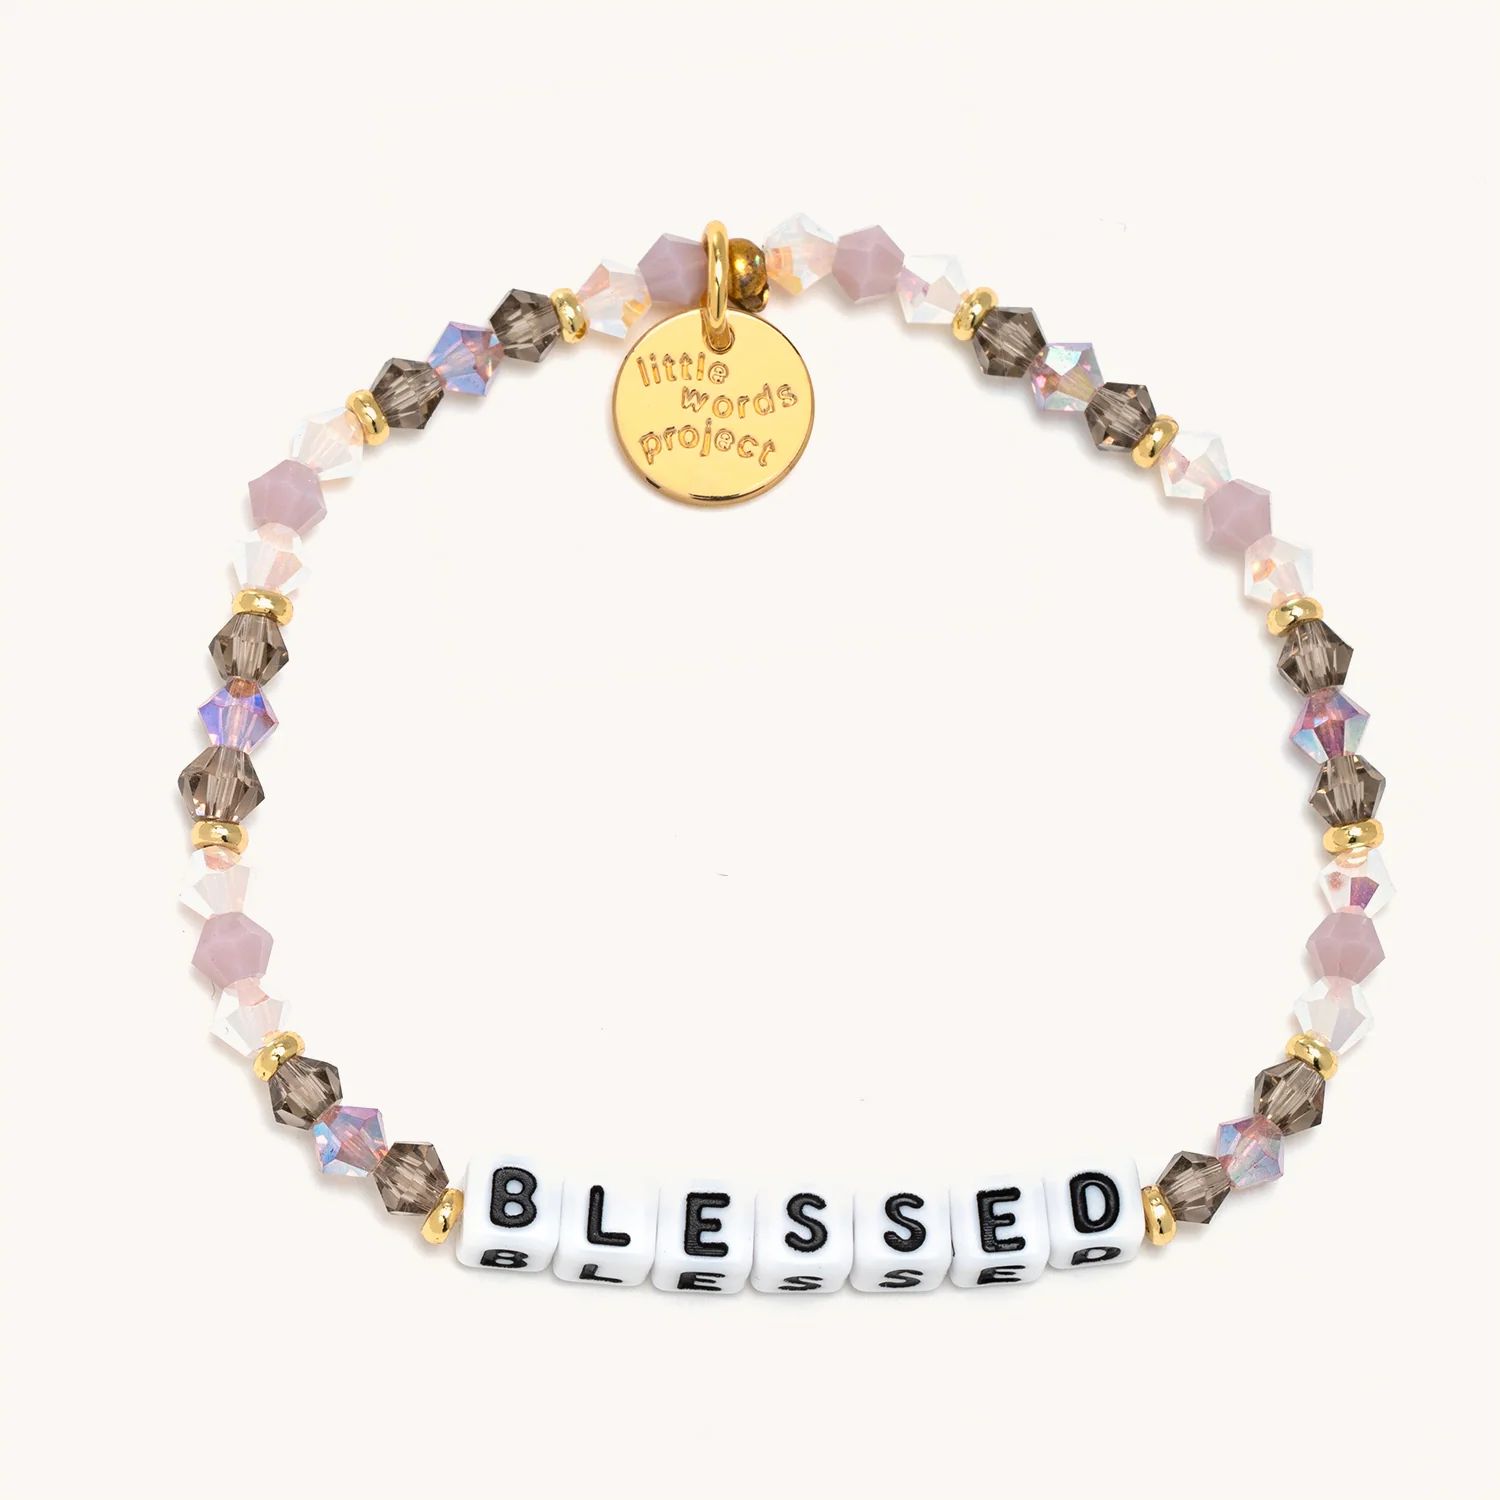 Blessed- Best Of | Little Words Project